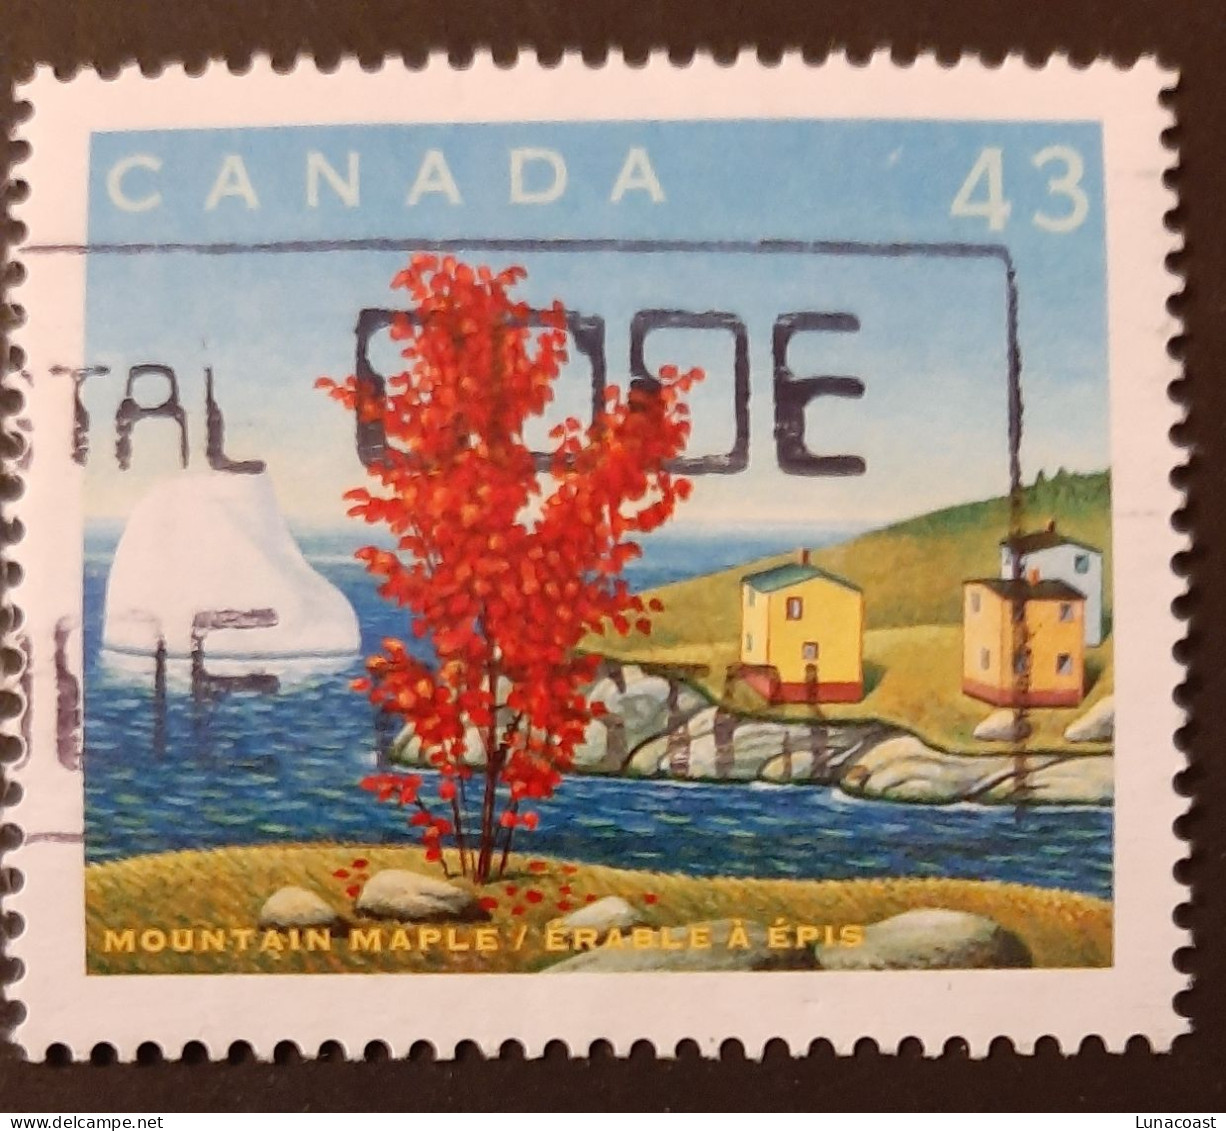 Canada 1994  USED  Sc1524 I   43c  Mountain Maple - Used Stamps